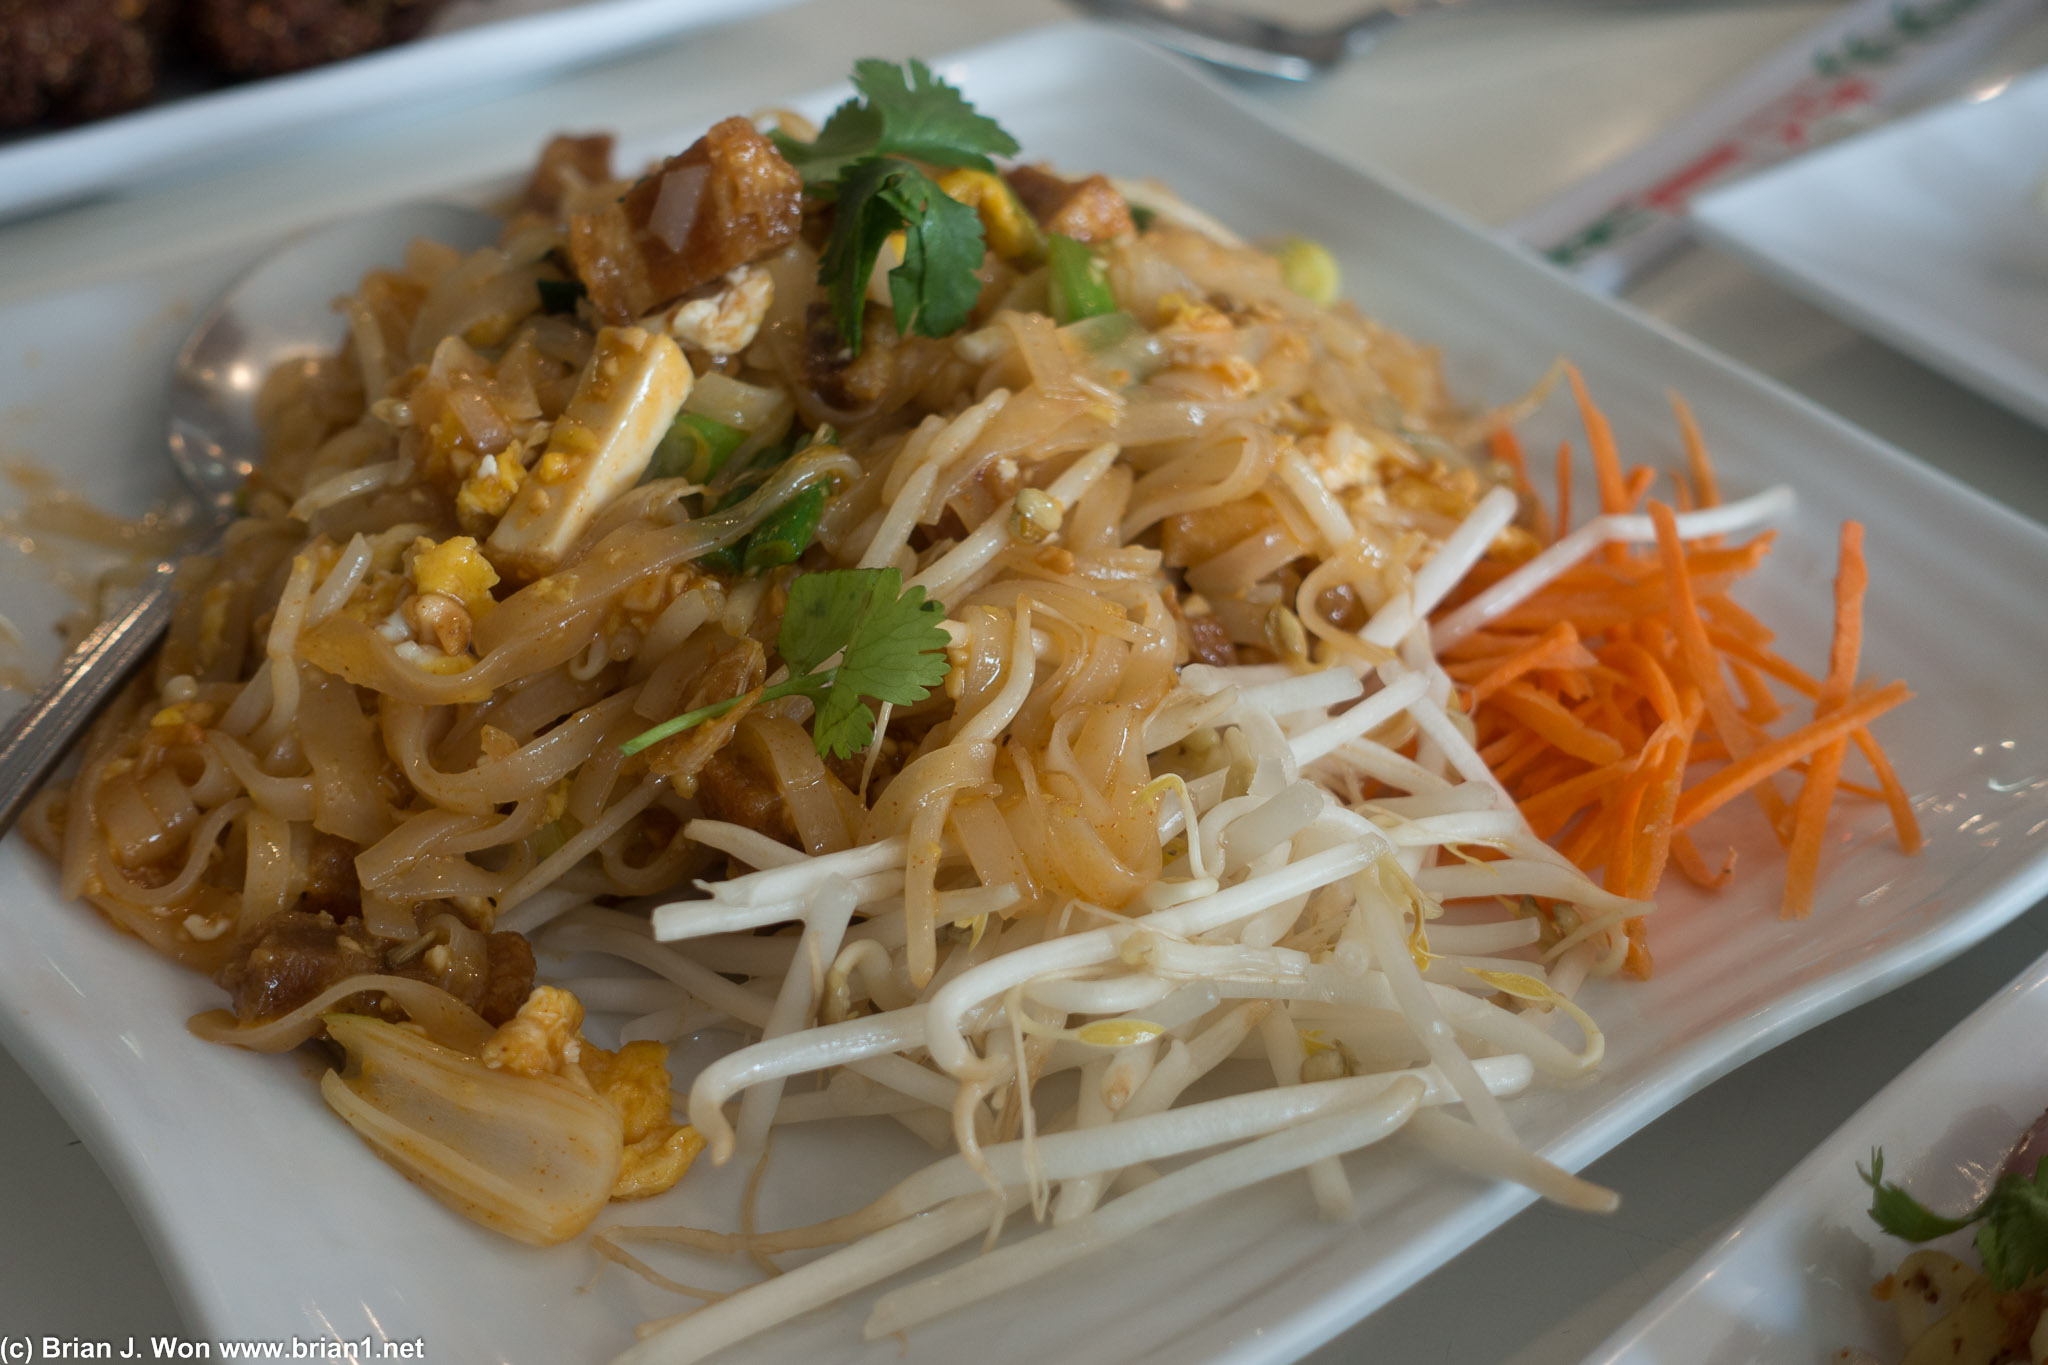 Deep fied pork pad thai. That was some damned good fried pork.